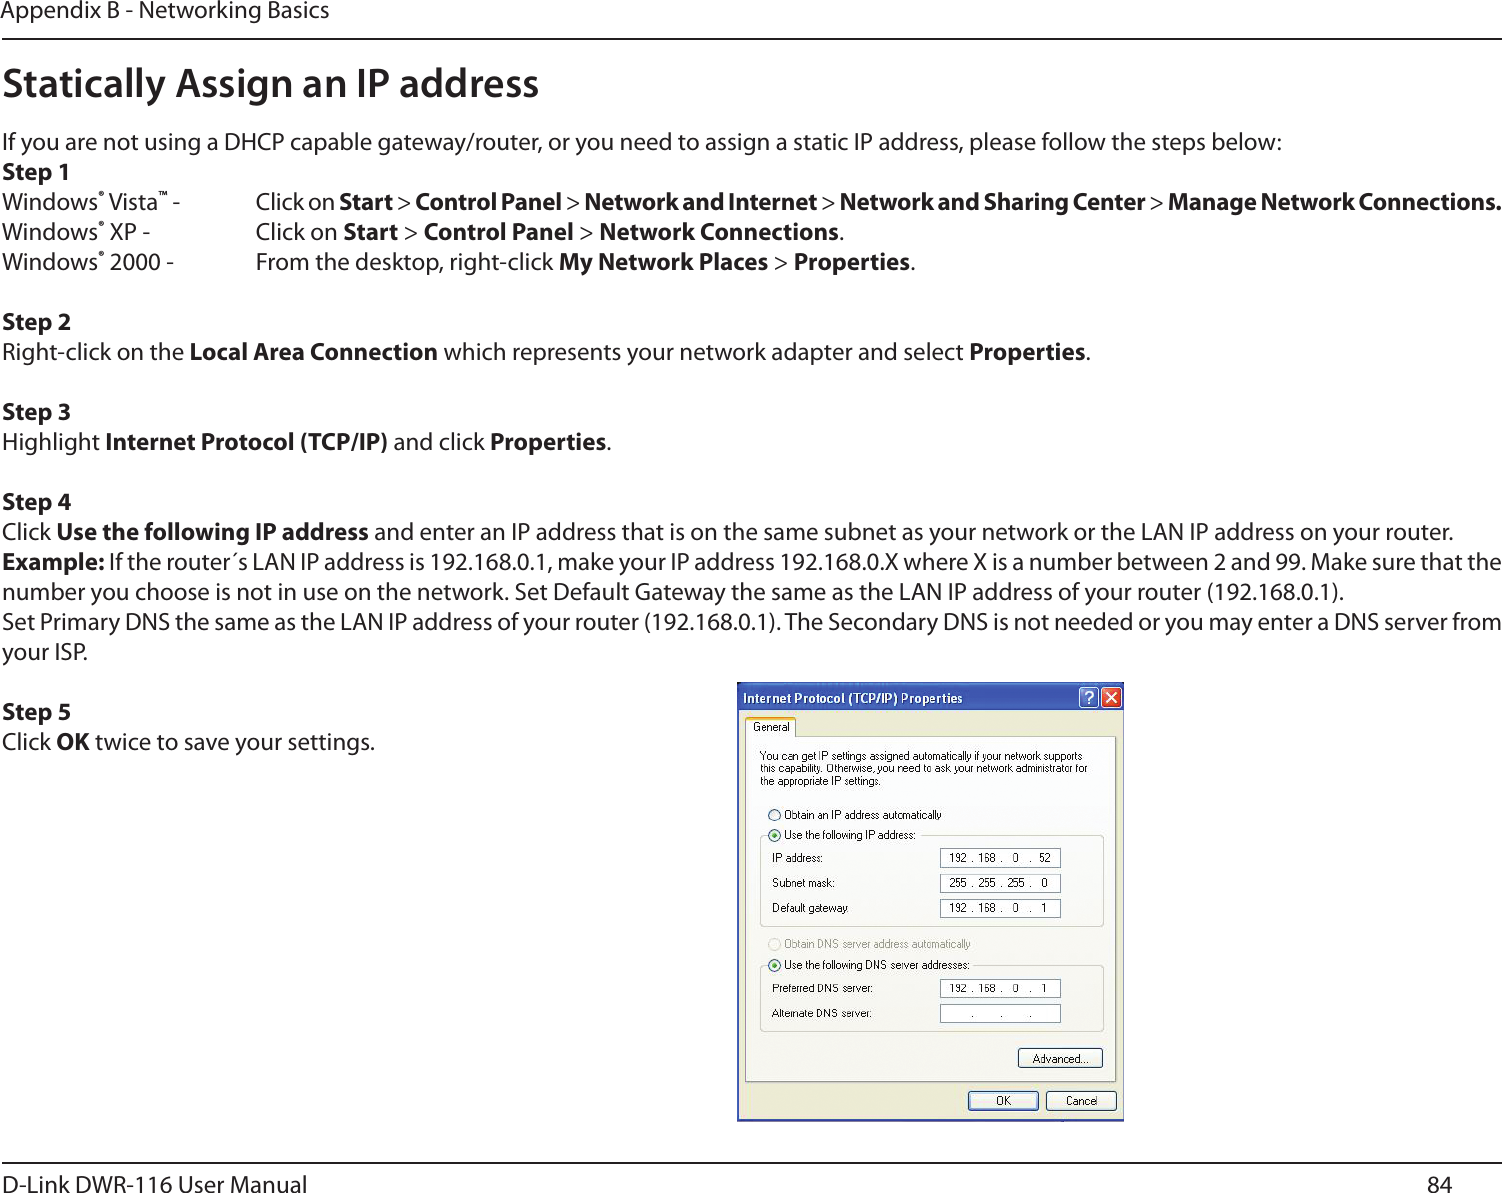 84D-Link DWR-116 User ManualAppendix B - Networking BasicsStatically Assign an IP addressIf you are not using a DHCP capable gateway/router, or you need to assign a static IP address, please follow the steps below:Step 1Windows® Vista™ -  Click on Start &gt; Control Panel &gt; Network and Internet &gt; Network and Sharing Center &gt; Manage Network Connections.Windows® XP -  Click on Start &gt; Control Panel &gt; Network Connections.Windows® 2000 -  From the desktop, right-click My Network Places &gt; Properties.Step 2Right-click on the Local Area Connection which represents your network adapter and select Properties.Step 3Highlight Internet Protocol (TCP/IP) and click Properties.Step 4Click Use the following IP address and enter an IP address that is on the same subnet as your network or the LAN IP address on your router. Example: If the router´s LAN IP address is 192.168.0.1, make your IP address 192.168.0.X where X is a number between 2 and 99. Make sure that the number you choose is not in use on the network. Set Default Gateway the same as the LAN IP address of your router (192.168.0.1). Set Primary DNS the same as the LAN IP address of your router (192.168.0.1). The Secondary DNS is not needed or you may enter a DNS server from your ISP.Step 5Click OK twice to save your settings.